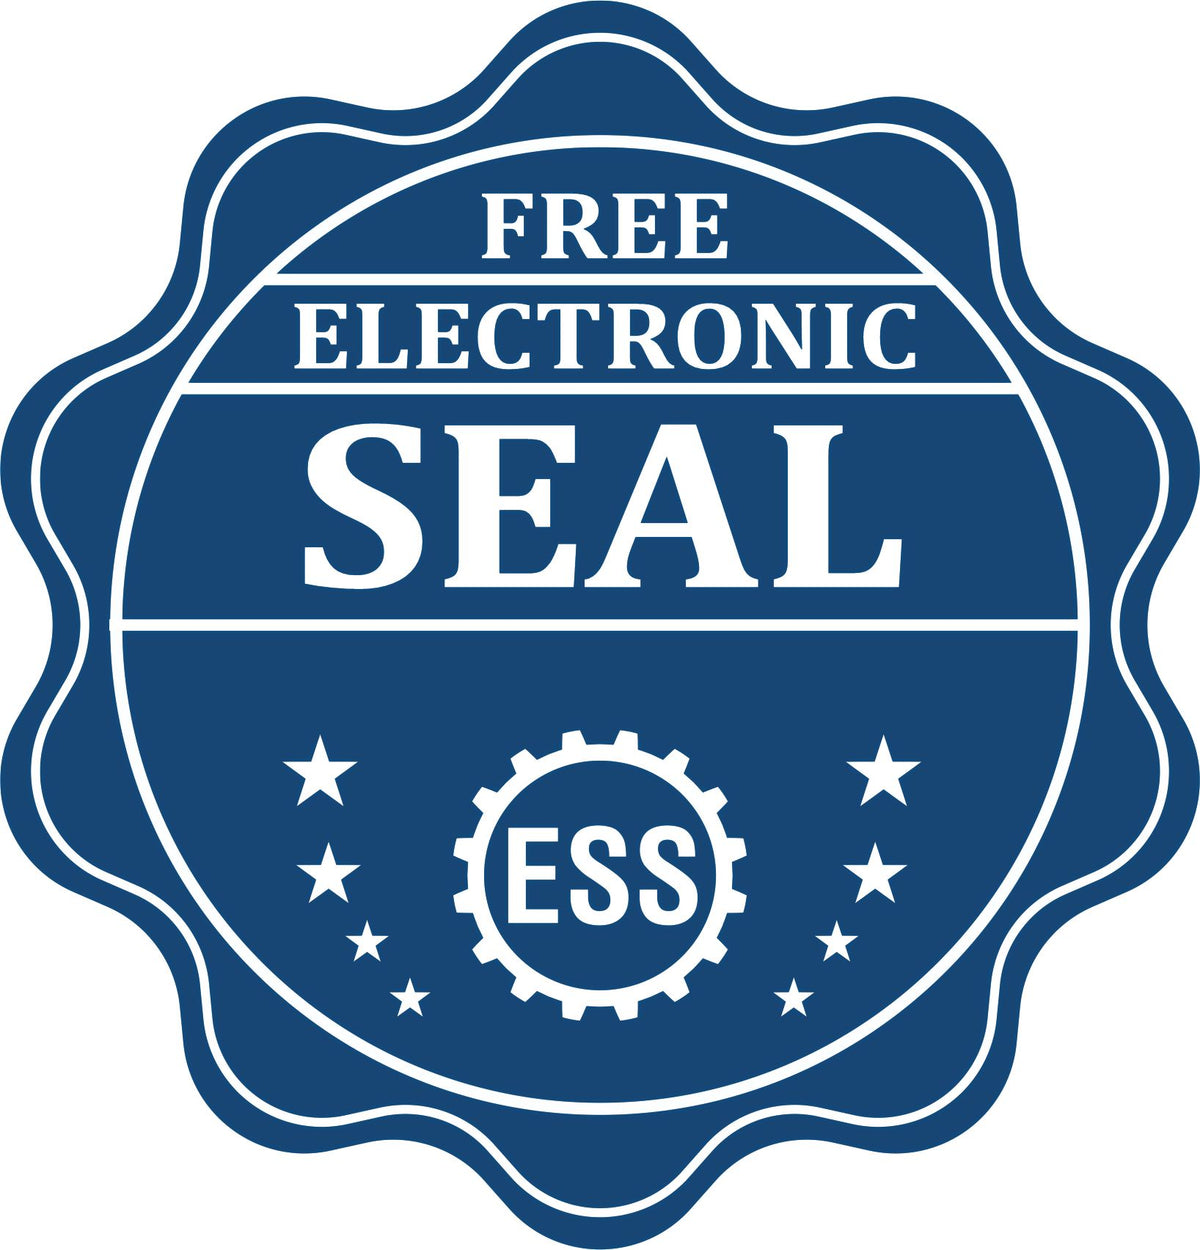 A badge showing a free electronic seal for the PSI New Mexico Notary Stamp with stars and the ESS gear on the emblem.